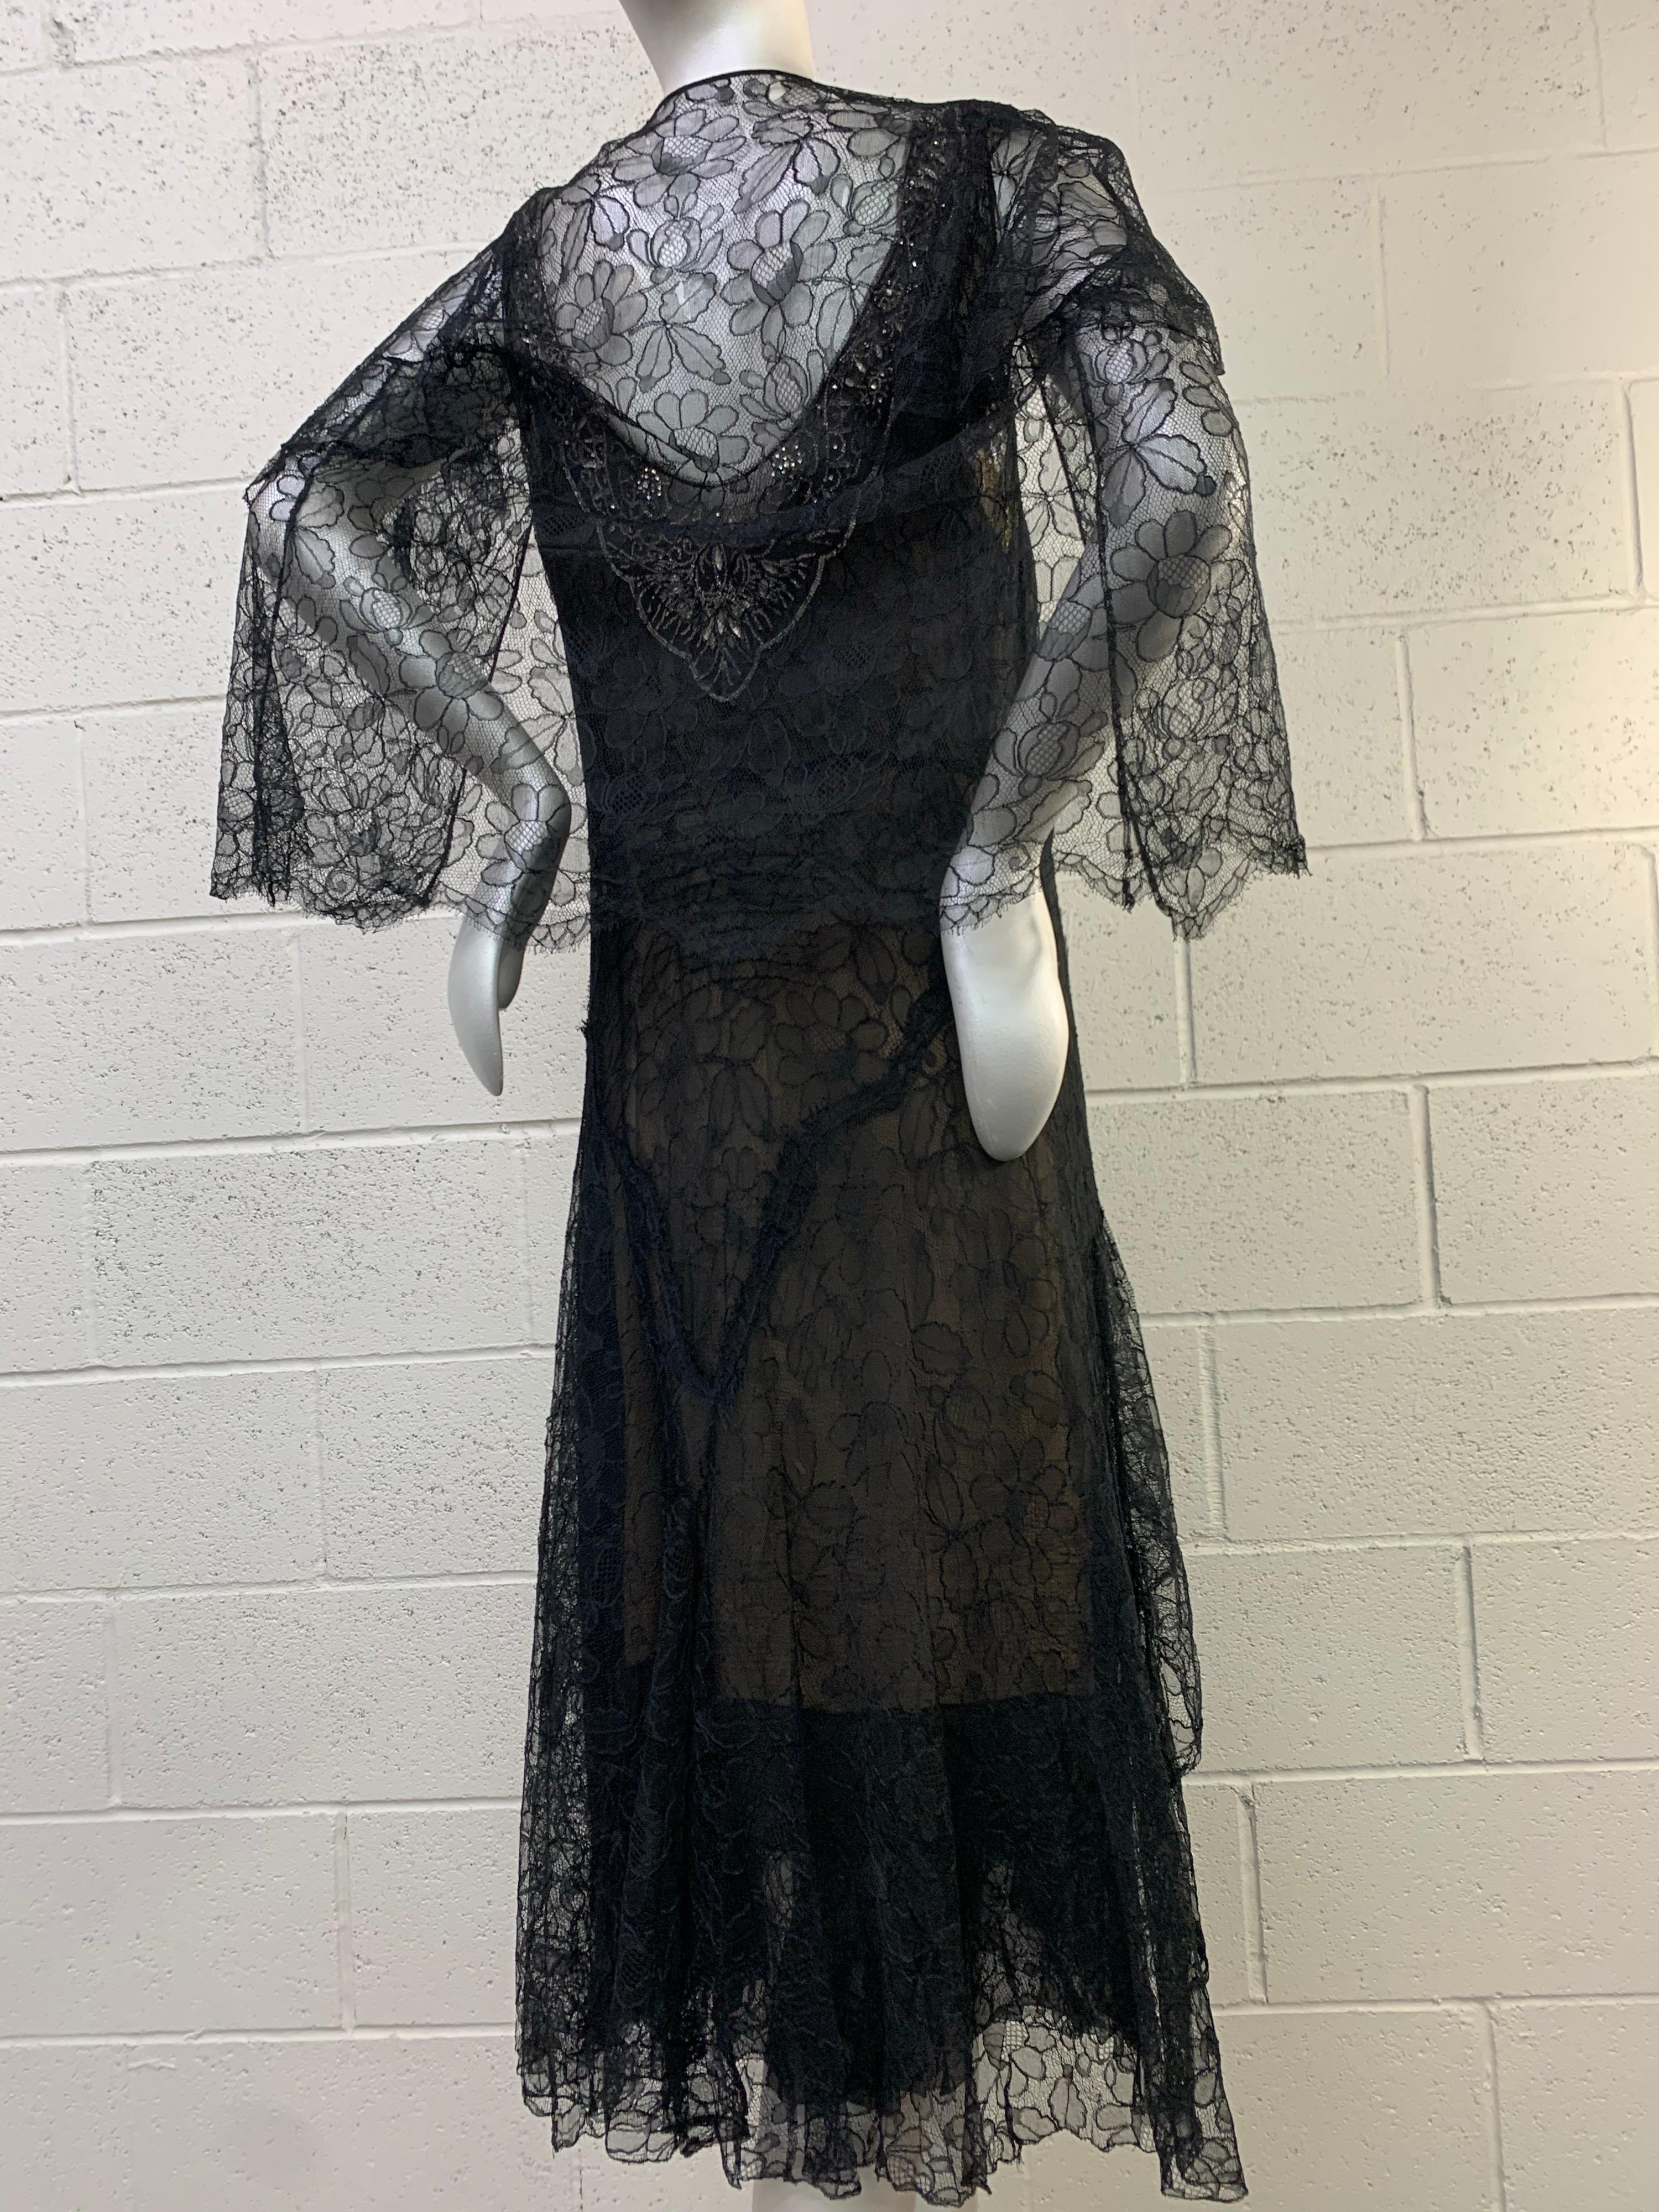 1920 Blackshire Exquisite French Beaded & Ruffled Lace Dress w/ Matching Jacket For Sale 7